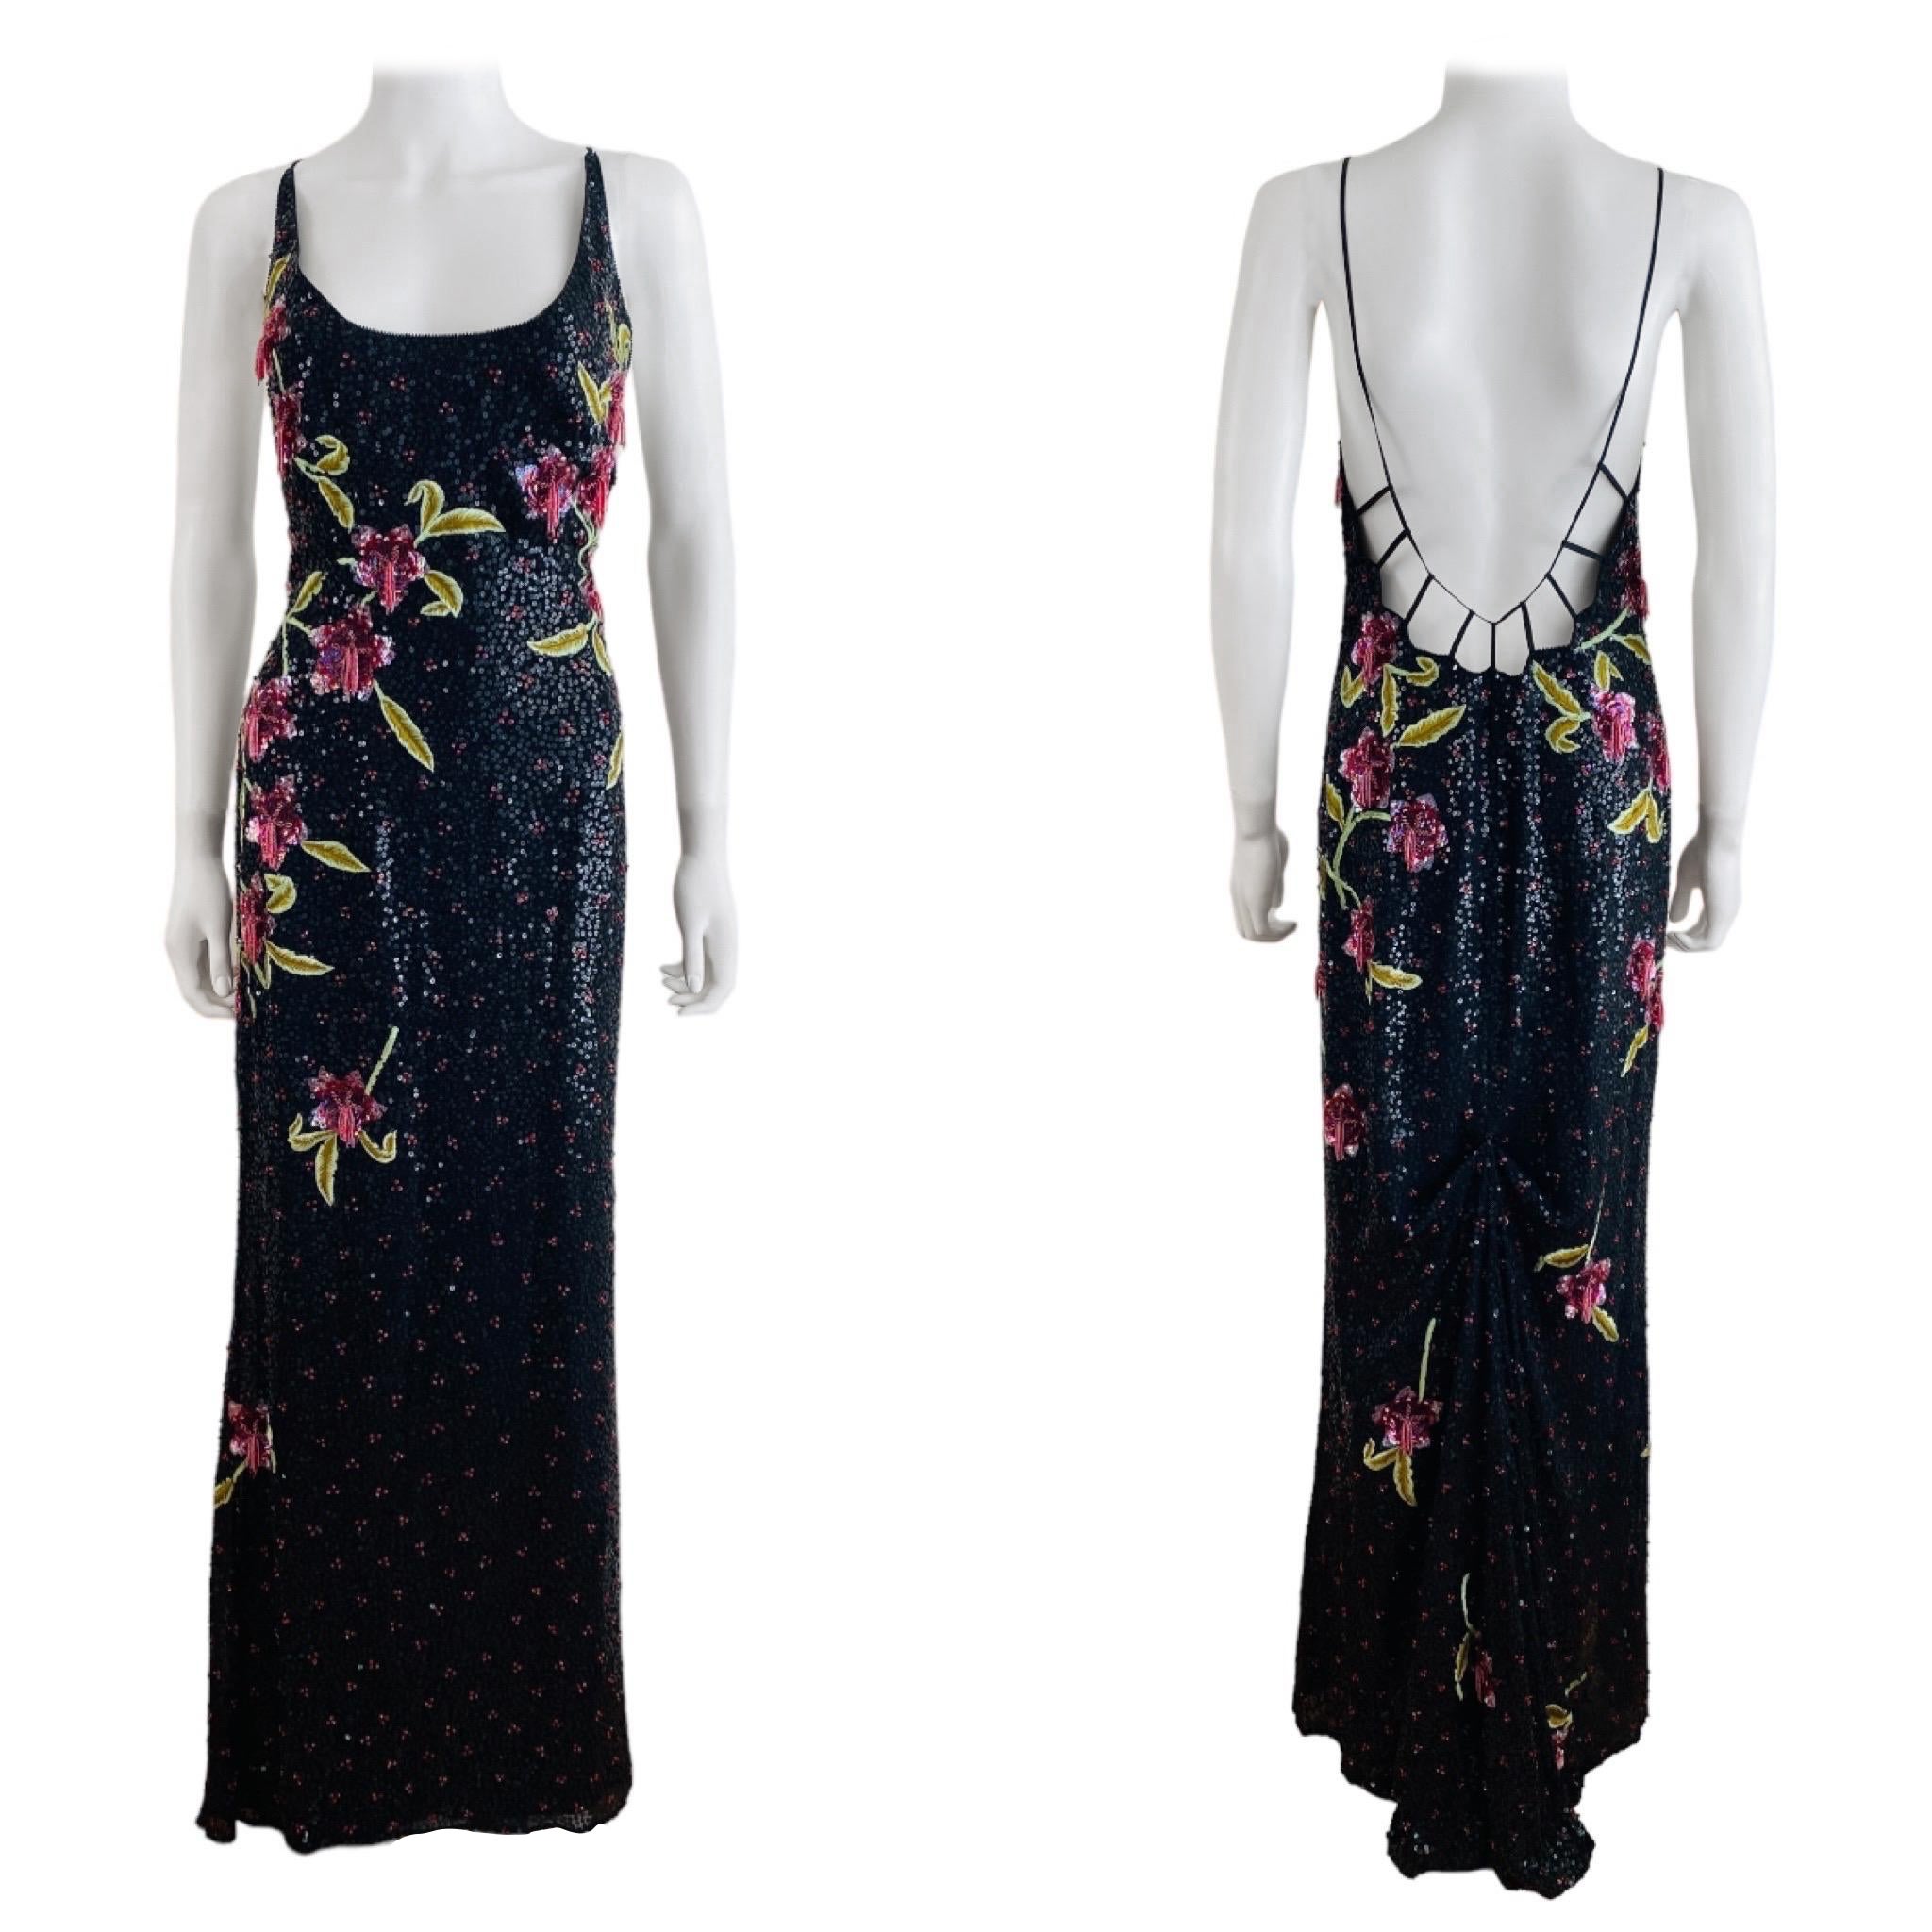 Vintage 2002 Escada Hand Beaded Sequin Floral Maxi Dress Gown Black Pink Flowers For Sale